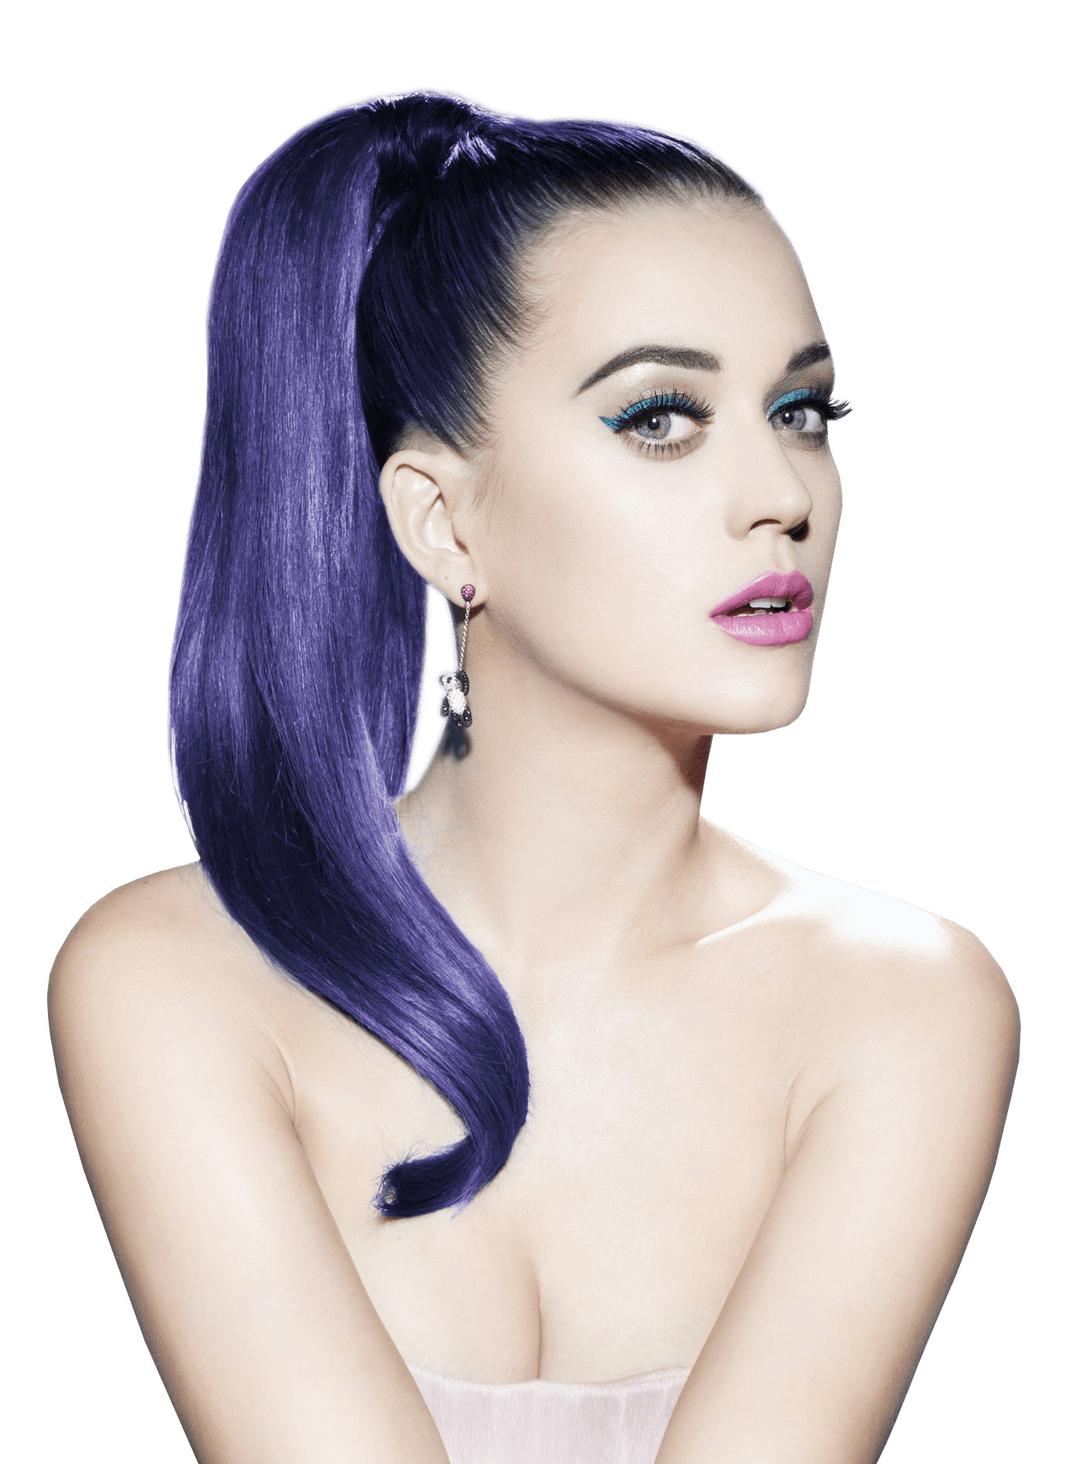 Innocent Katy Perry png transparent